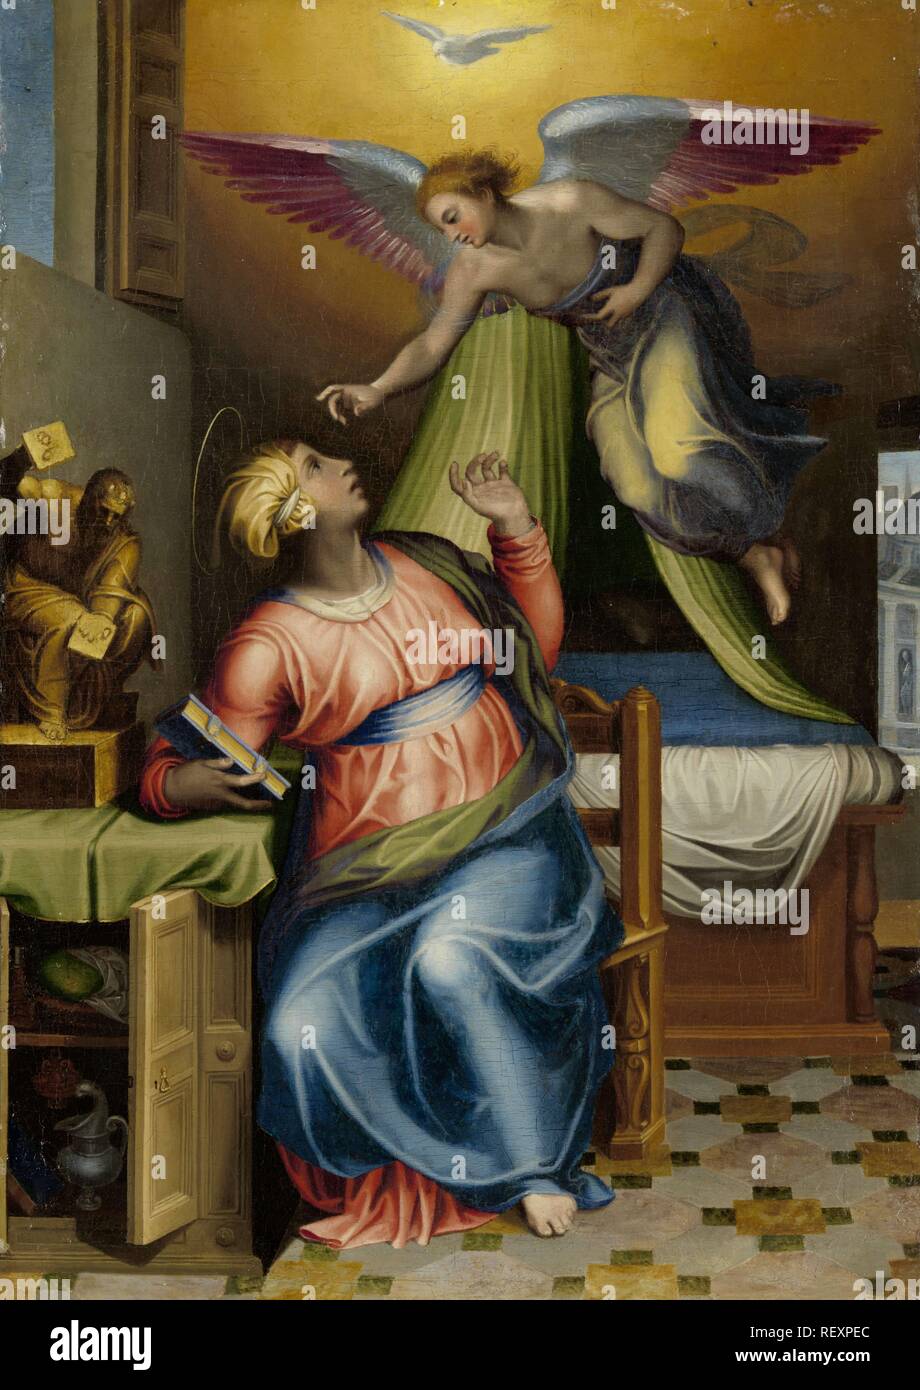 Annunciation to the Virgin. Dating: 1550 - 1570. Measurements: h 41.7 cm × w 30 cm; d 8.5 cm. Museum: Rijksmuseum, Amsterdam. Author: Marcello Venusti (circle of). Stock Photo